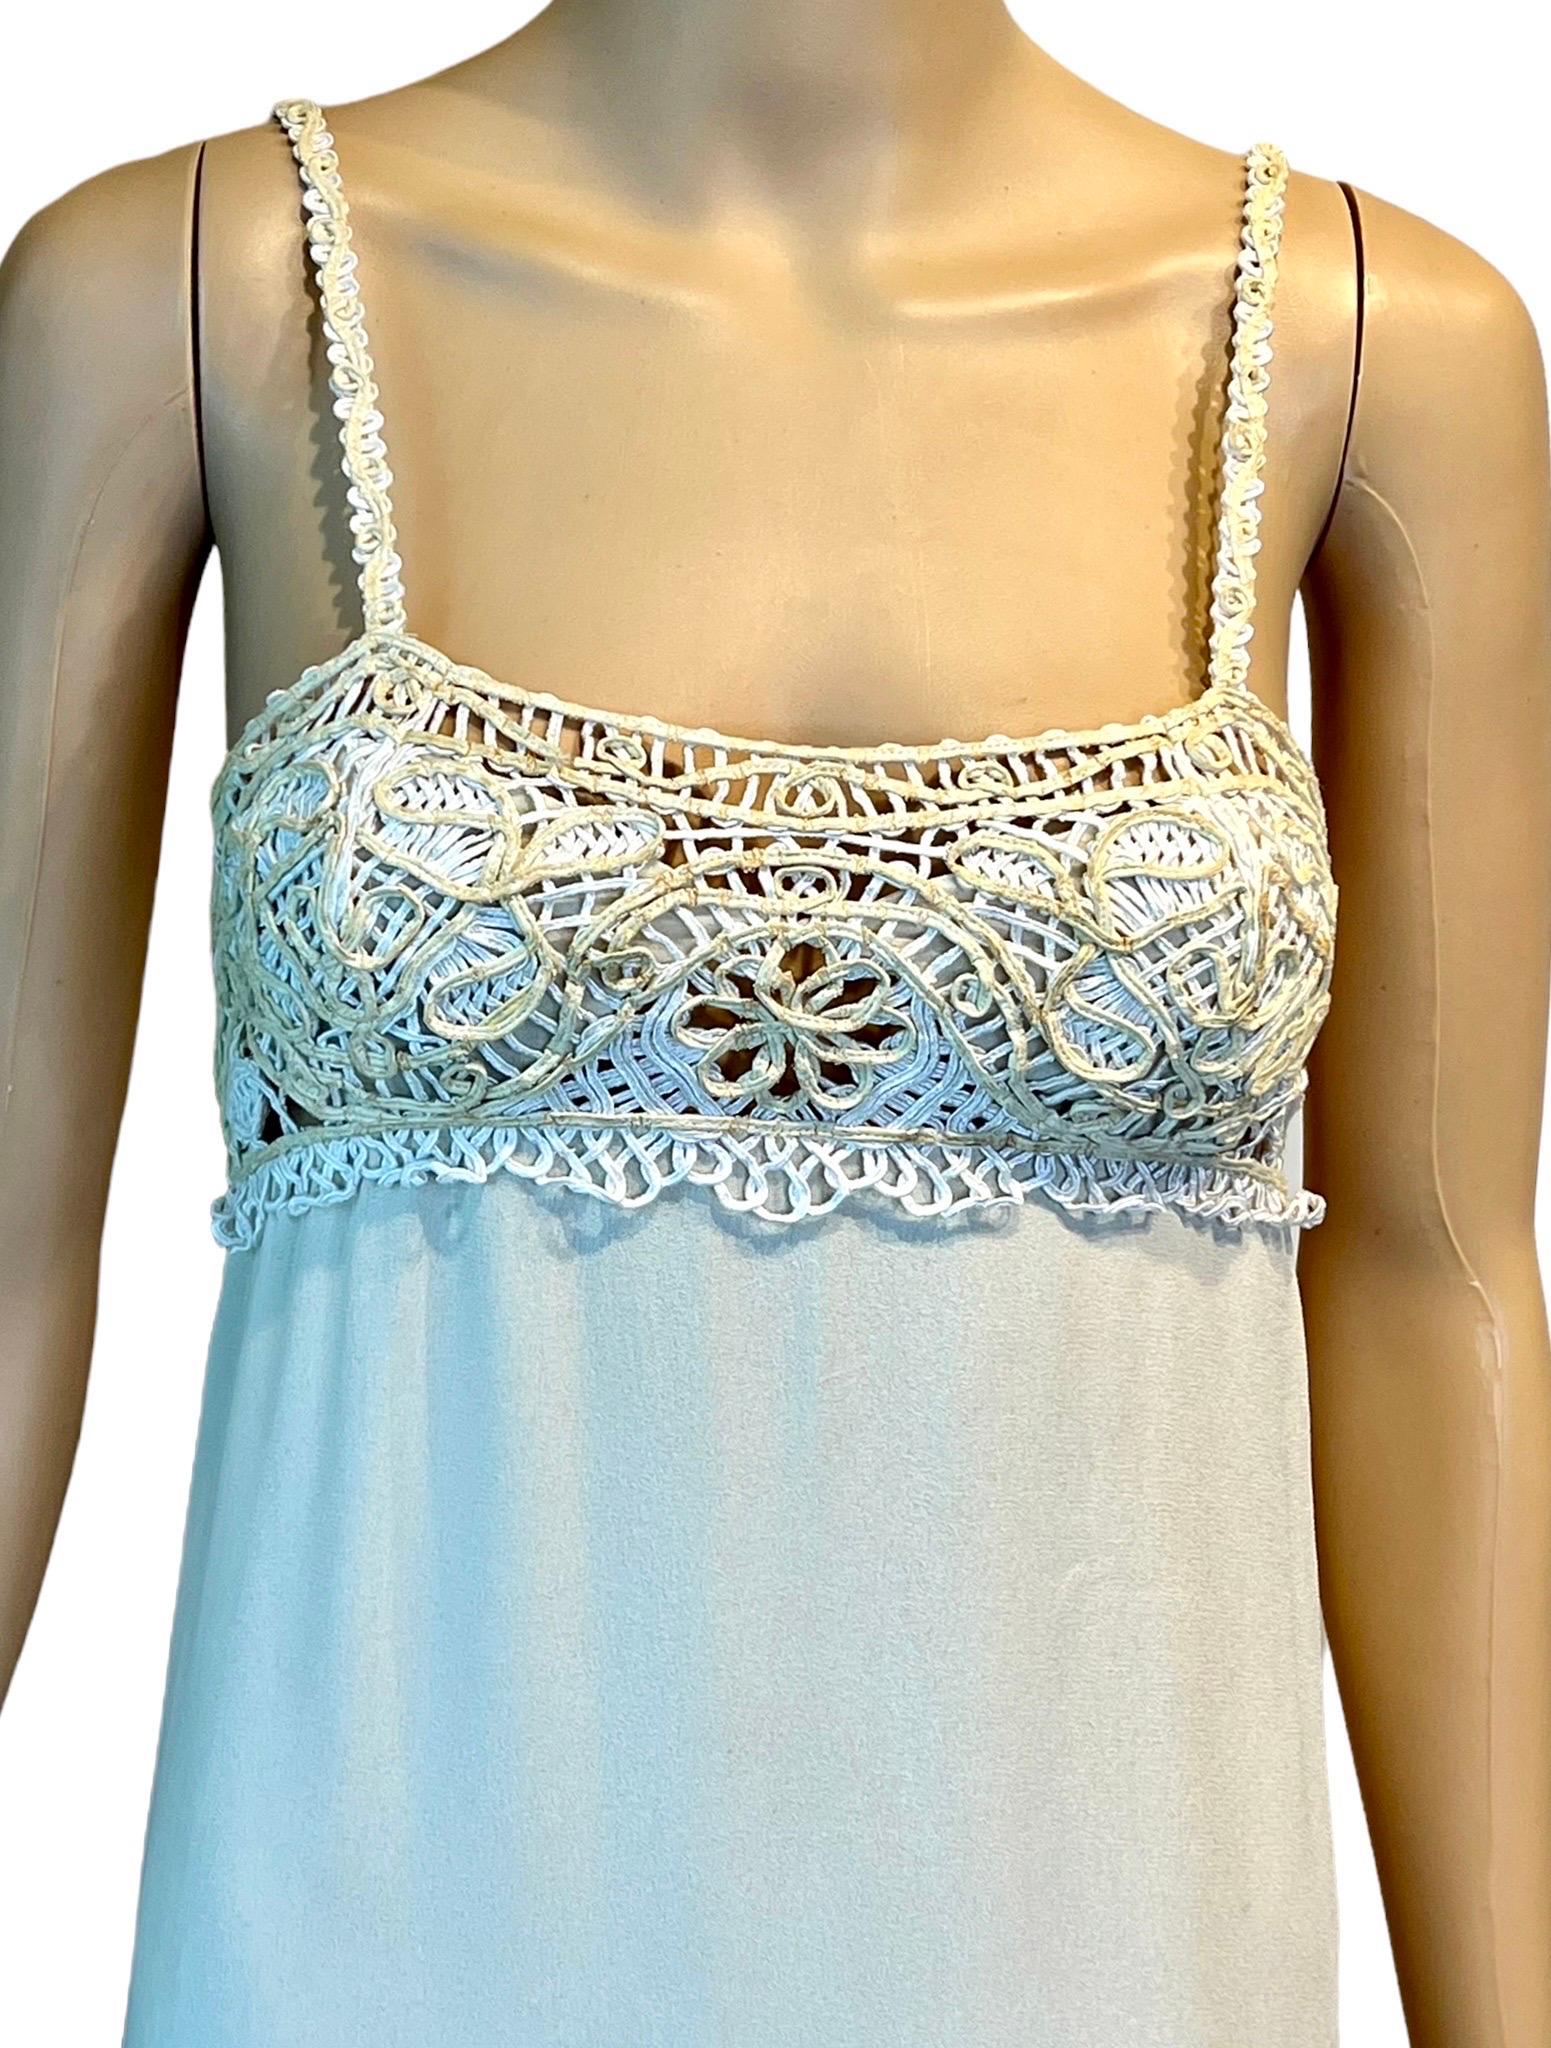 Gianni Versace S/S 1997 Runway Embroidered Lace Ivory Evening Dress Gown  In Good Condition For Sale In Naples, FL